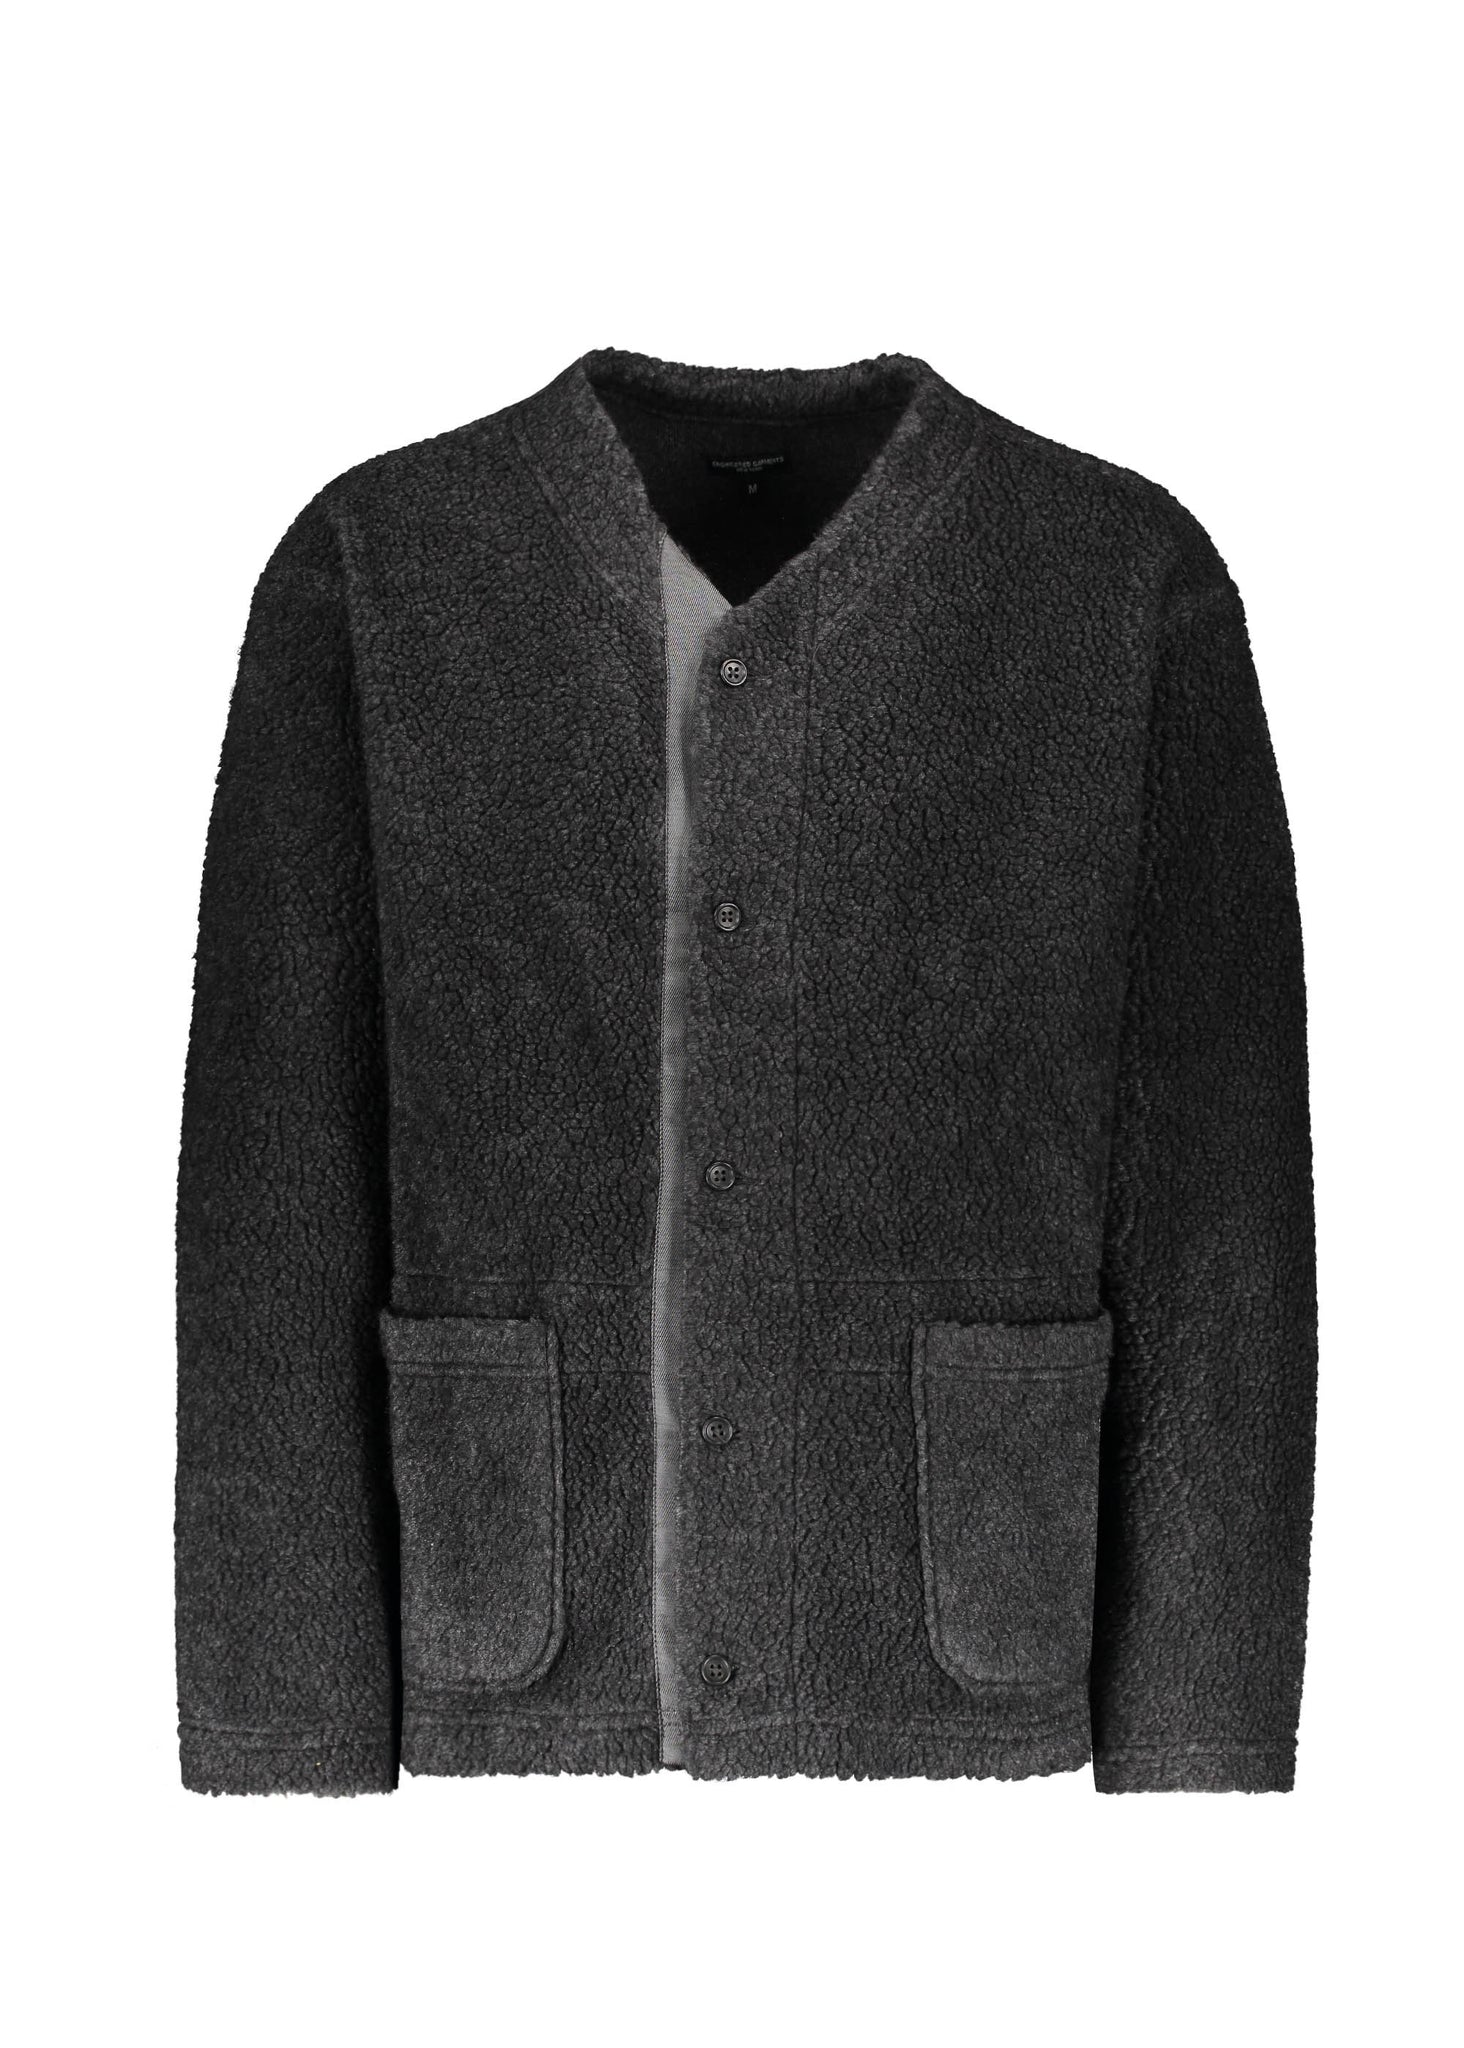 Wool Poly Shaggy Knit - Charcoal